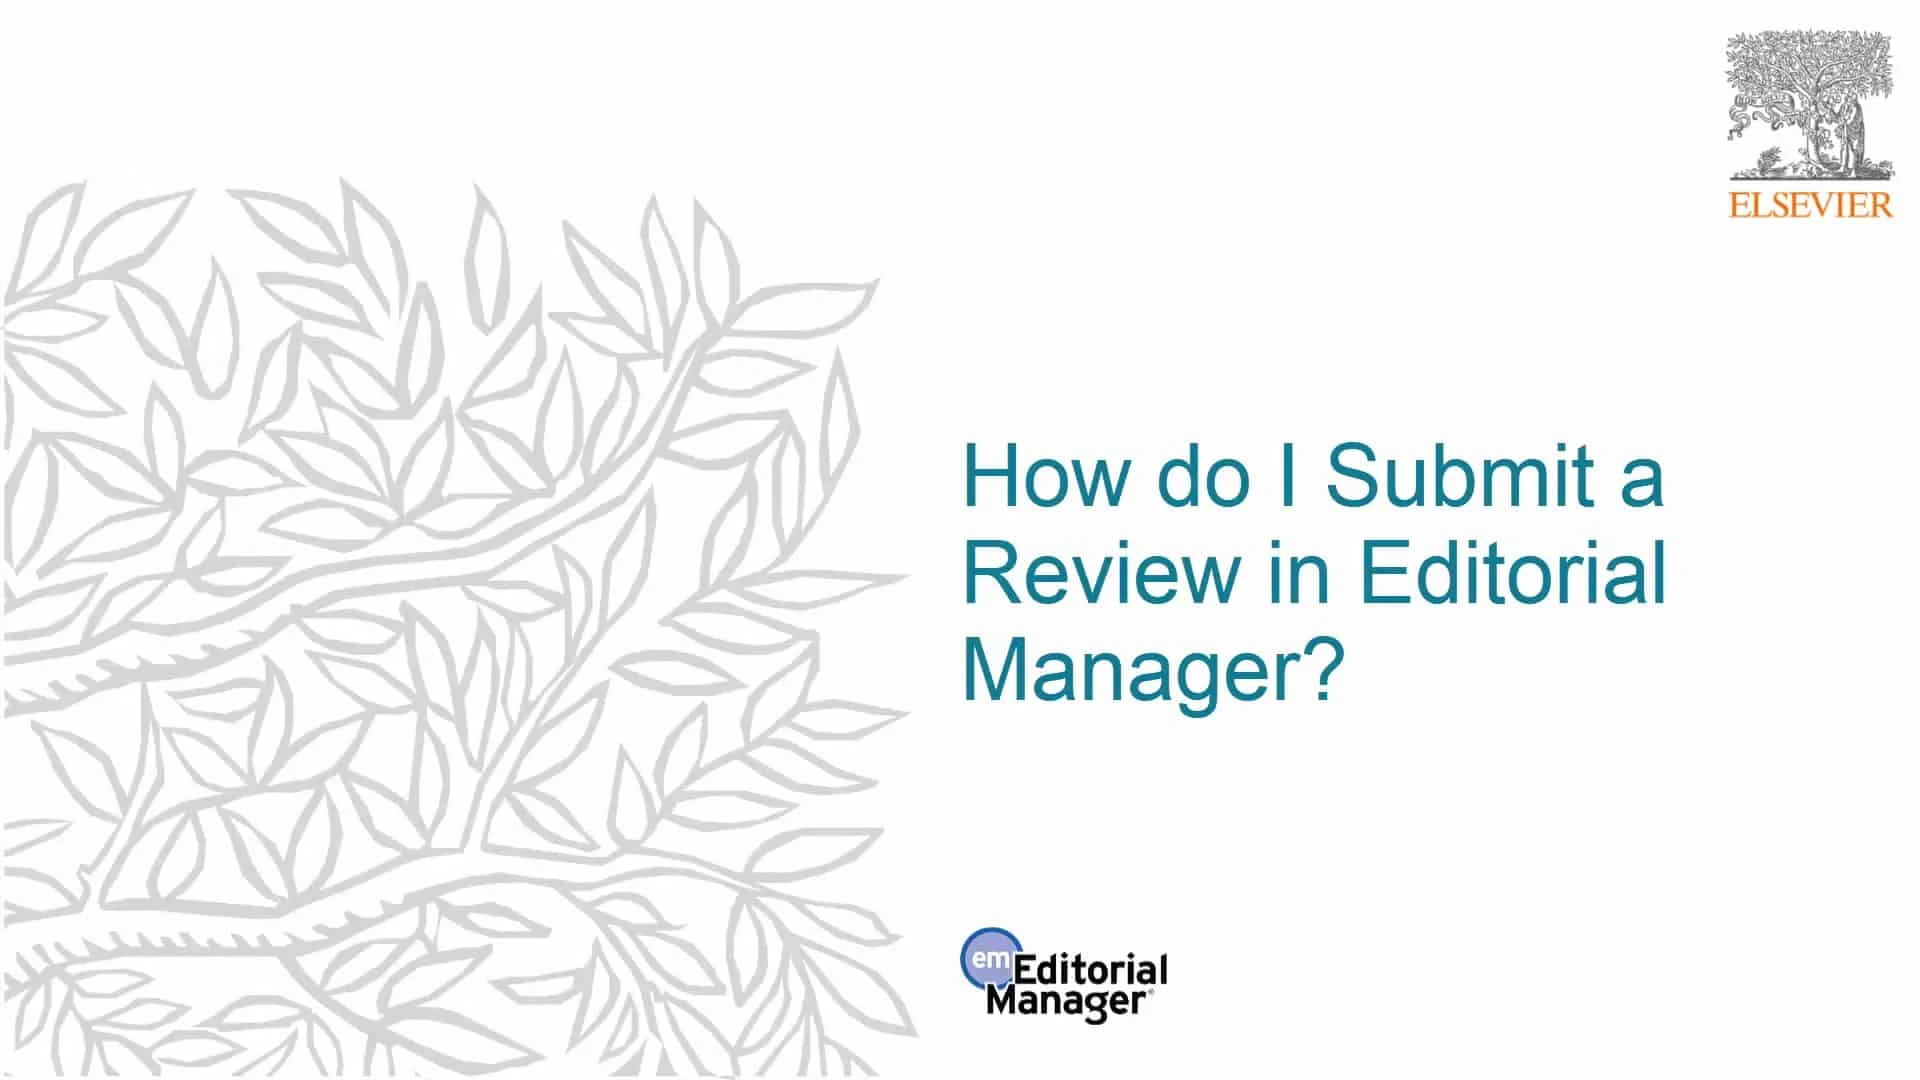 How to submit a review in Editorial Manager (video frame)